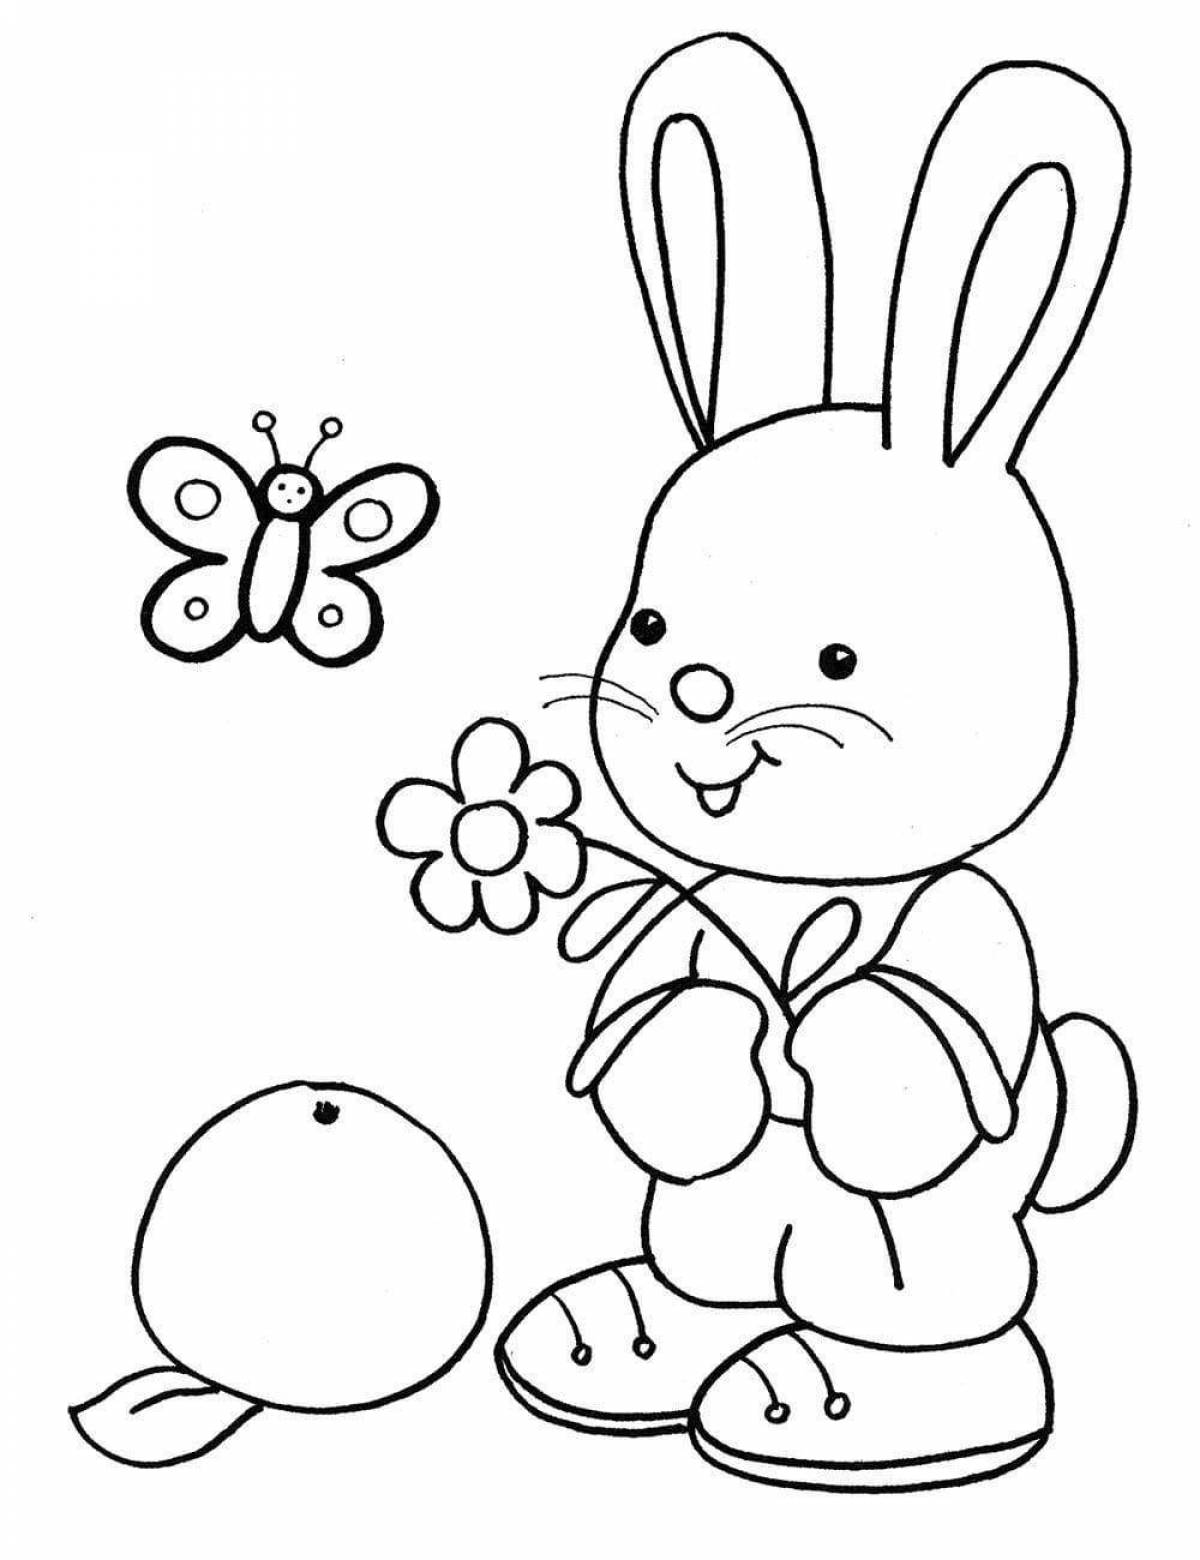 Adorable coloring book for 4-5 year olds